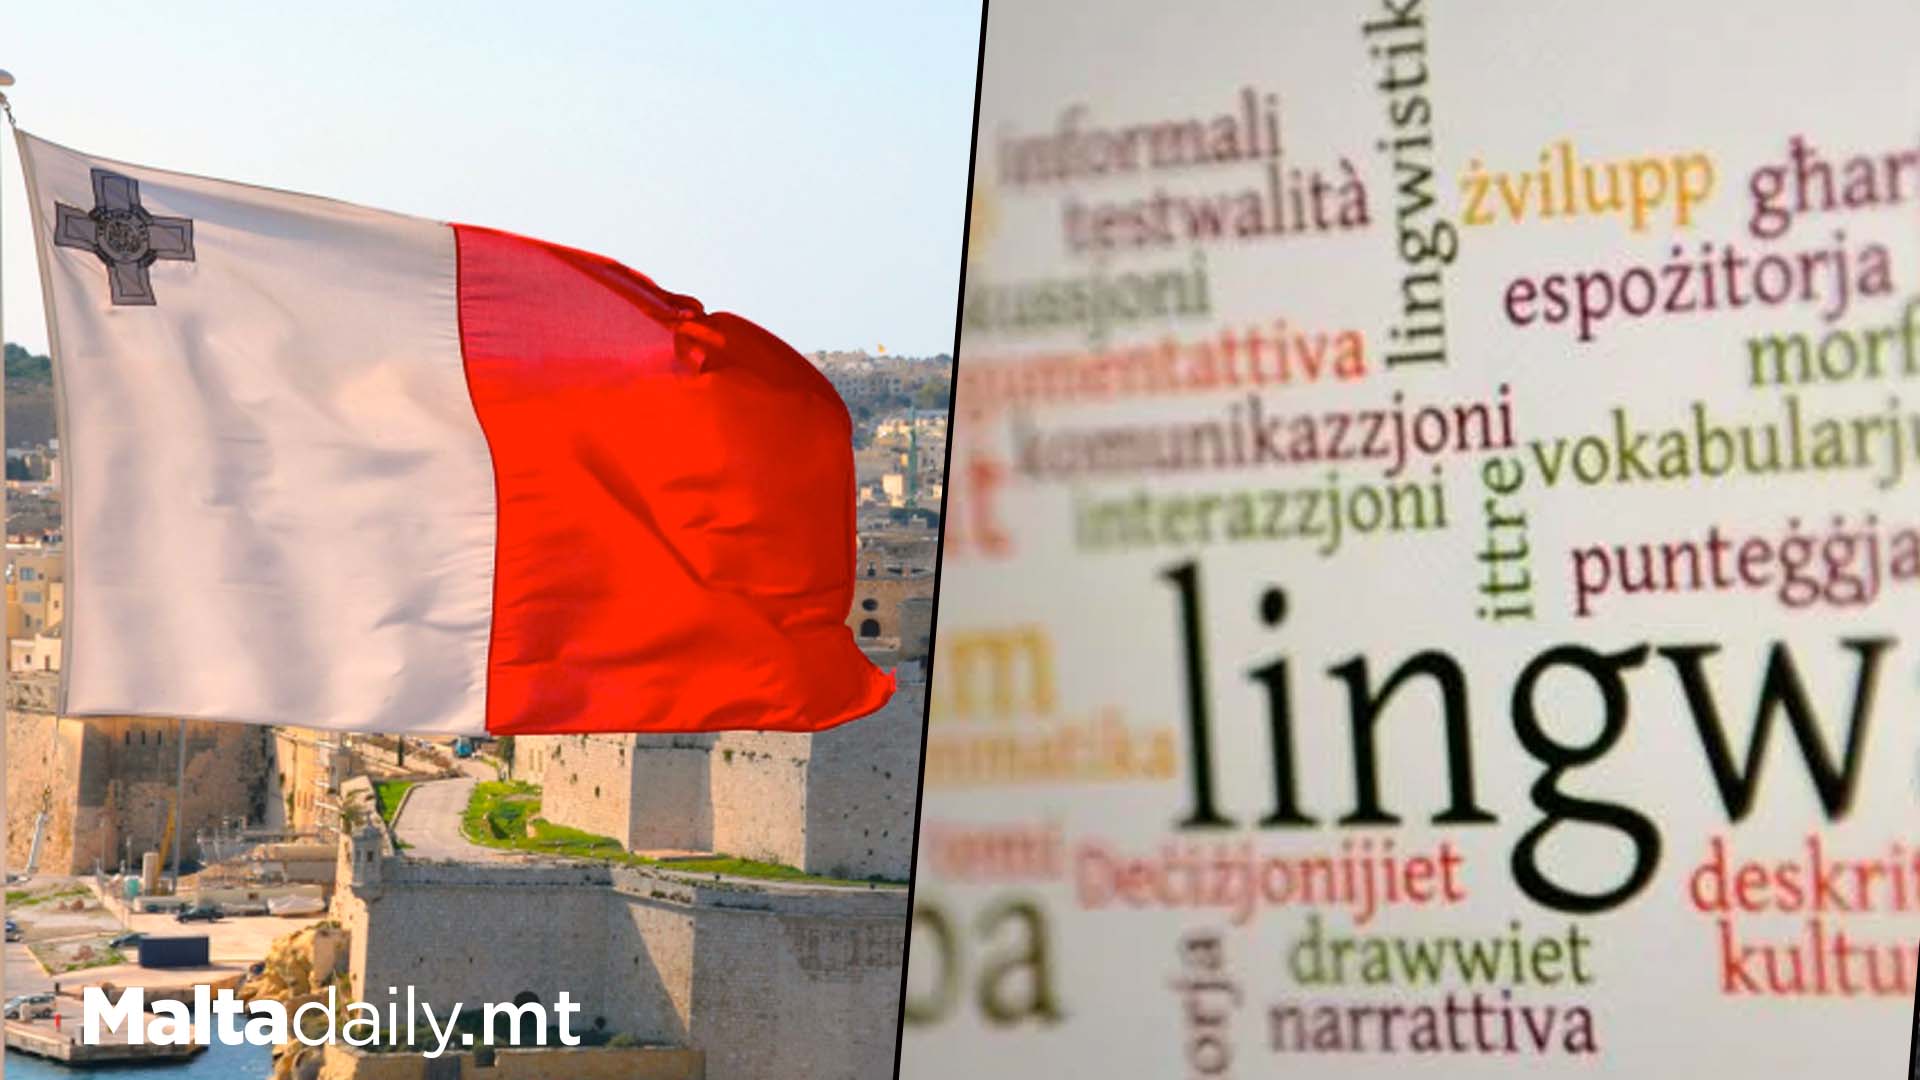 84.3% Agree Foreigners In Malta Should Learn Maltese Language